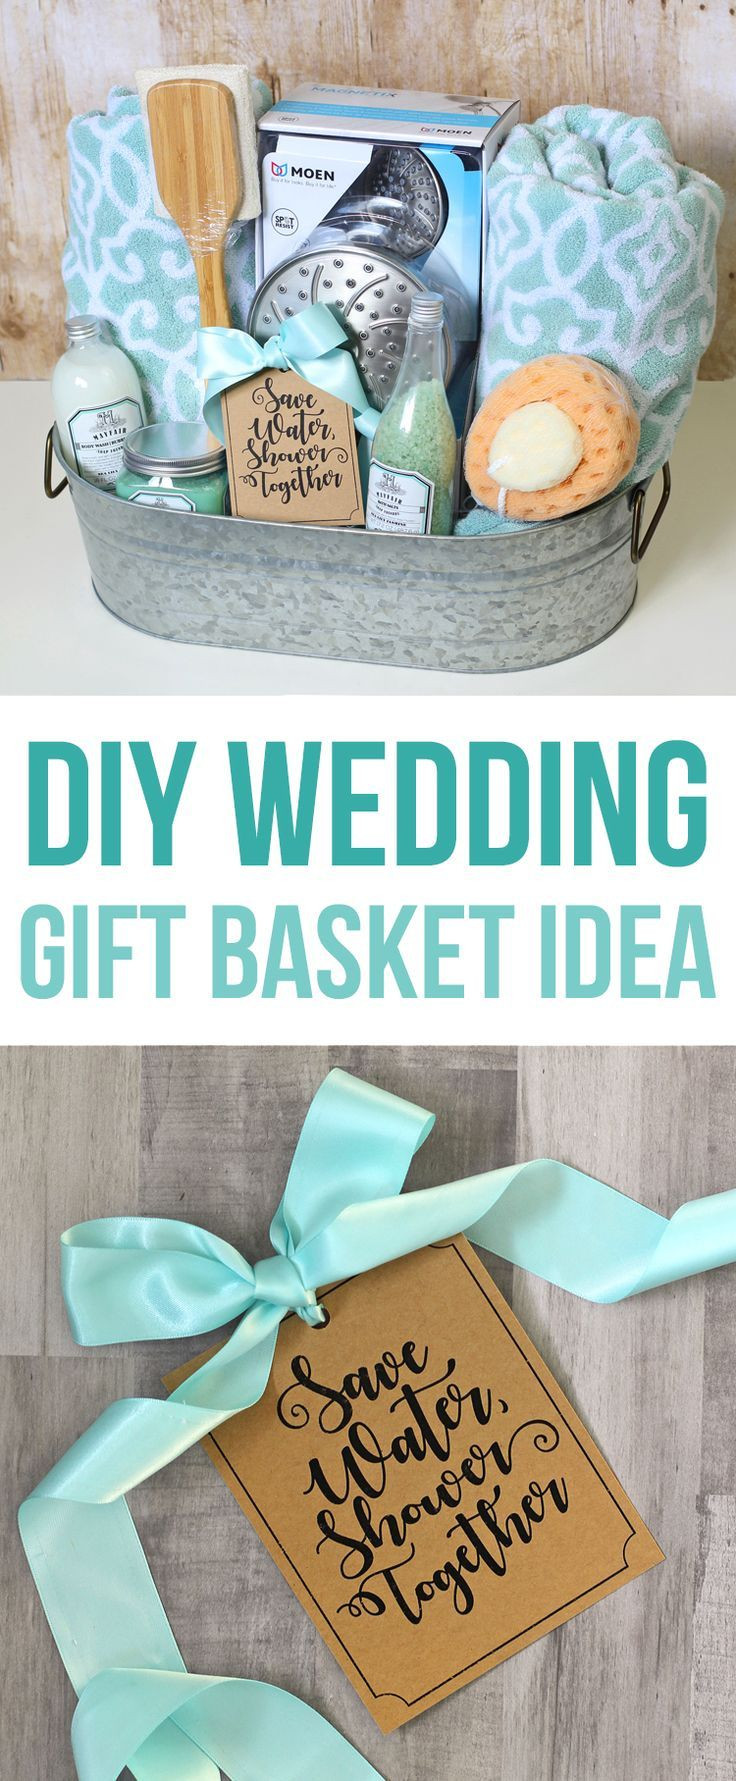 DIY Bridal Shower Gifts Ideas
 This DIY wedding t basket idea has a shower theme and